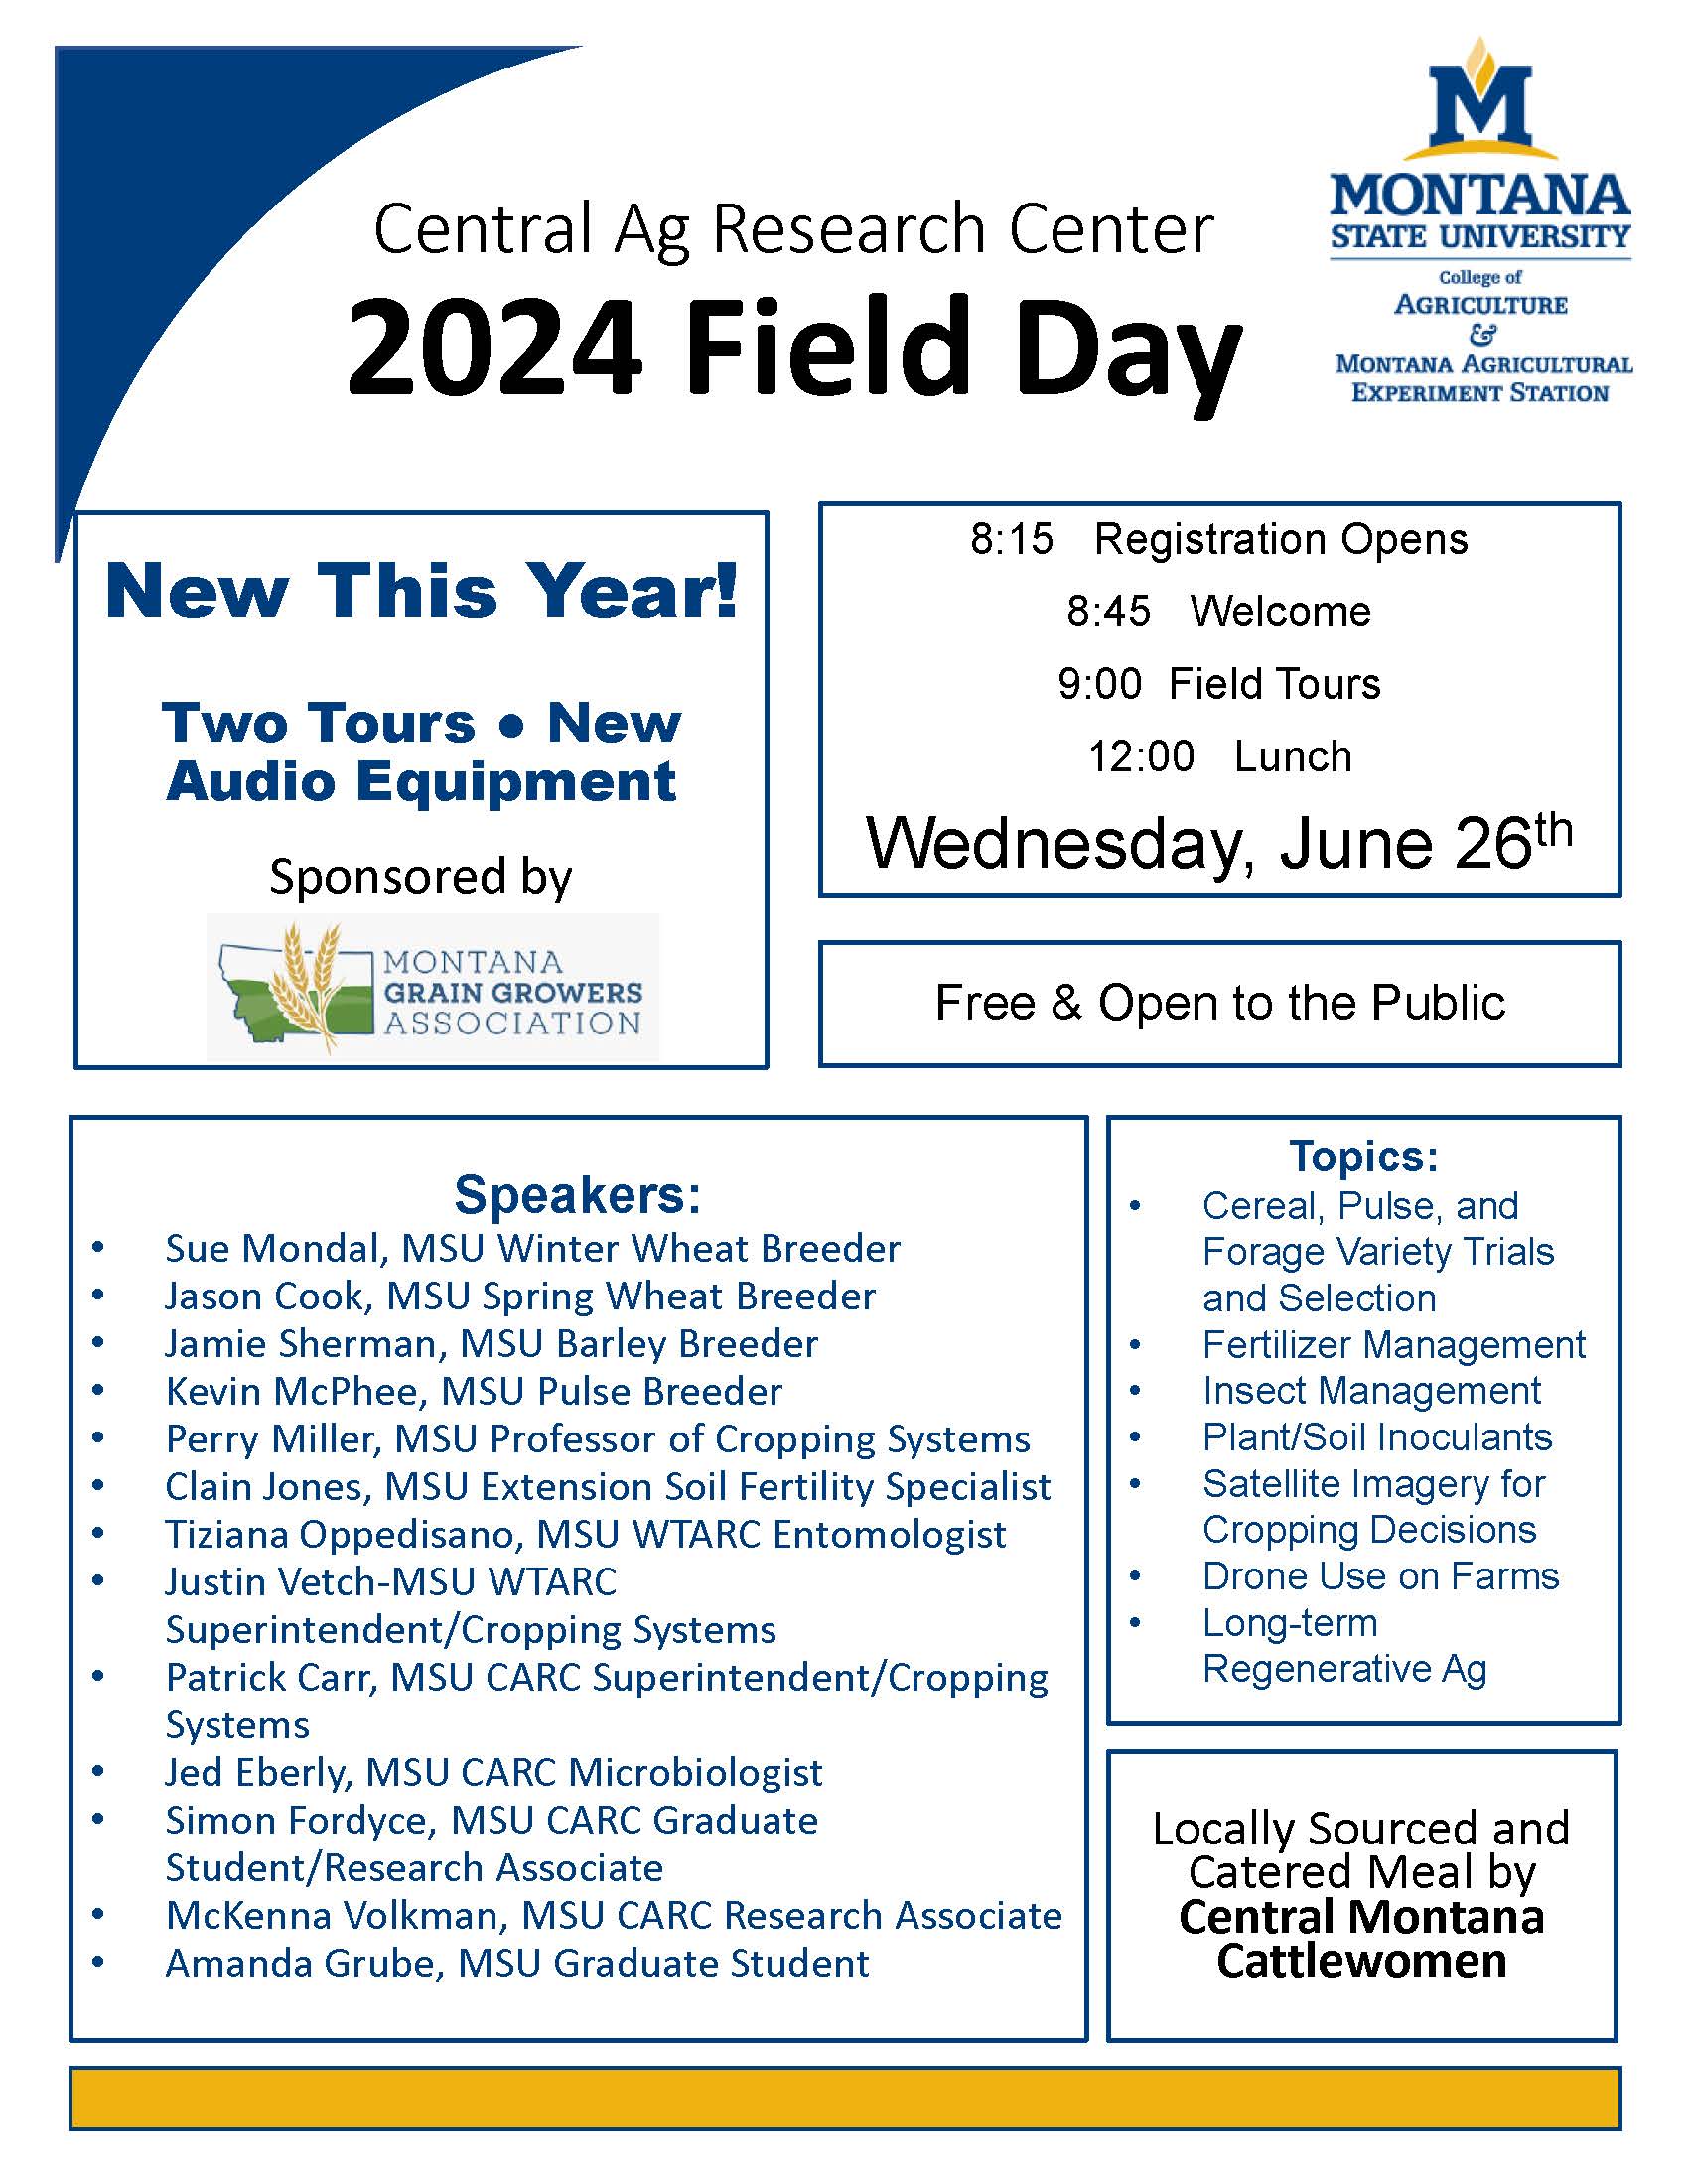 poster advertising CARCs fiield day.  June 26th, 8:15-noon.  lunch catered by Central MT Cattlewomen, day sponsored by Montana Grain Growers Association.  Many speakers on various farm topics.  New audio equipment and two tours this year!